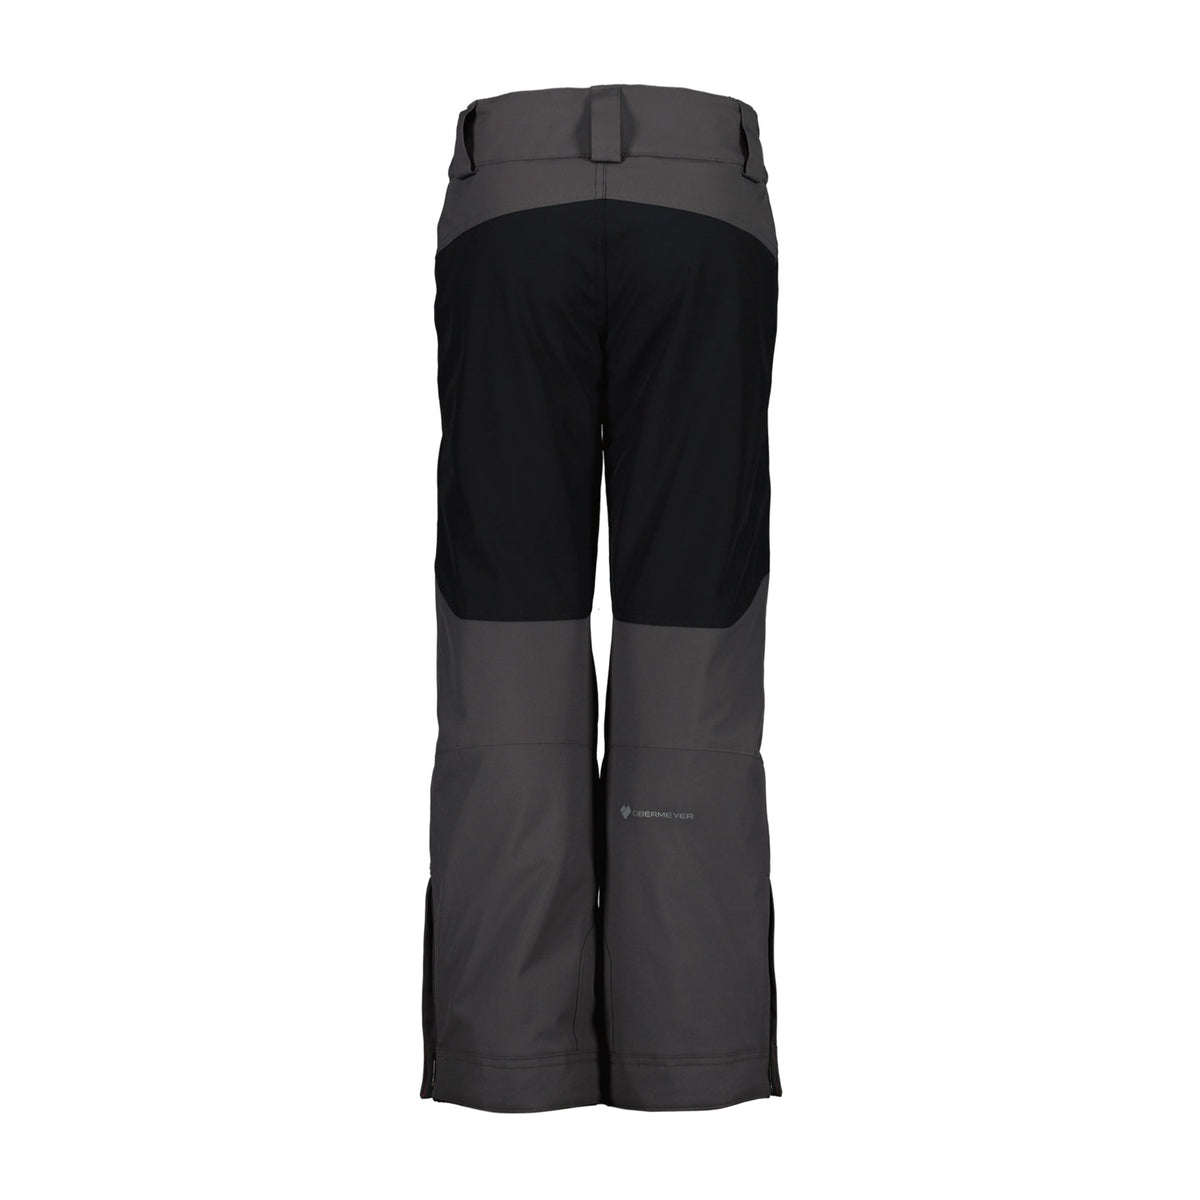 Image features the back of the Obermeyer kids Parker Pant in coal with black panels above the knees.